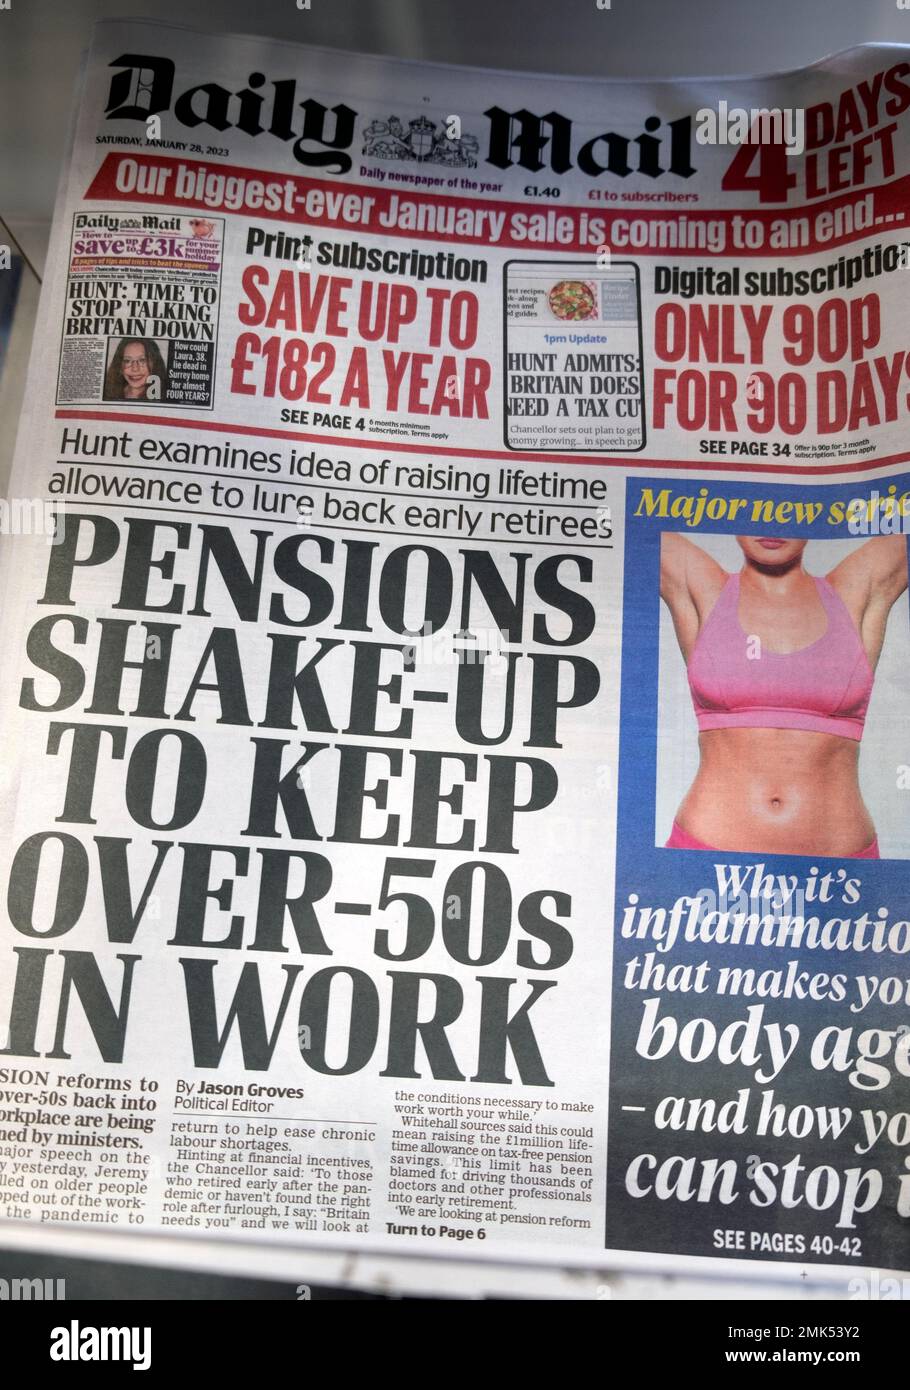 « Pensions Shake-Up to Keep-50s in Work » Daily Mail première page Jeremy Hunt titre du journal le 28 janvier 2023 Londres Angleterre Royaume-Uni Grande-Bretagne Banque D'Images